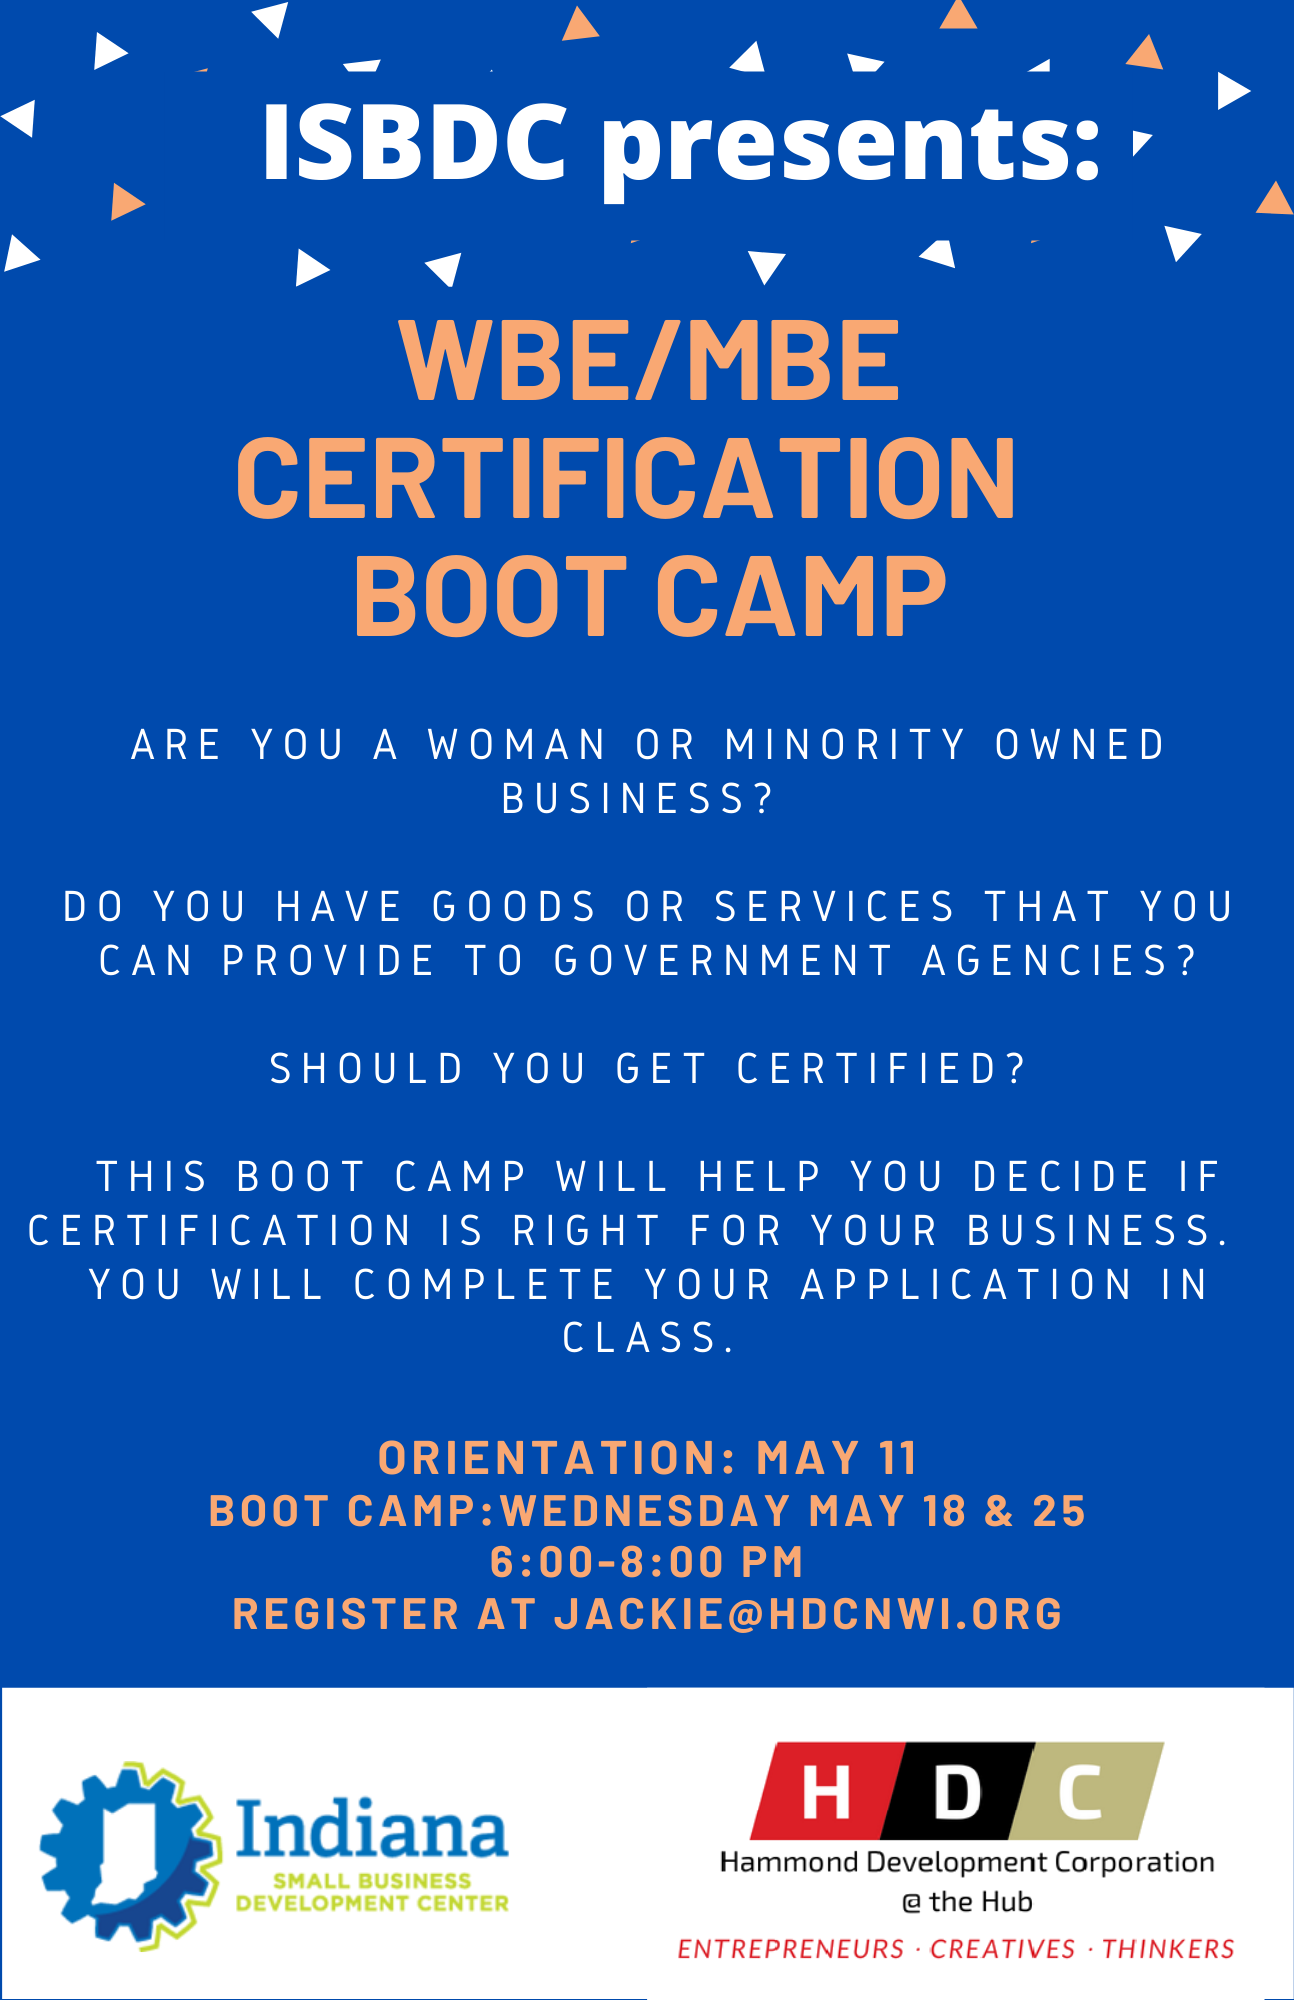 WBEMBE Certification boot camp Flyer